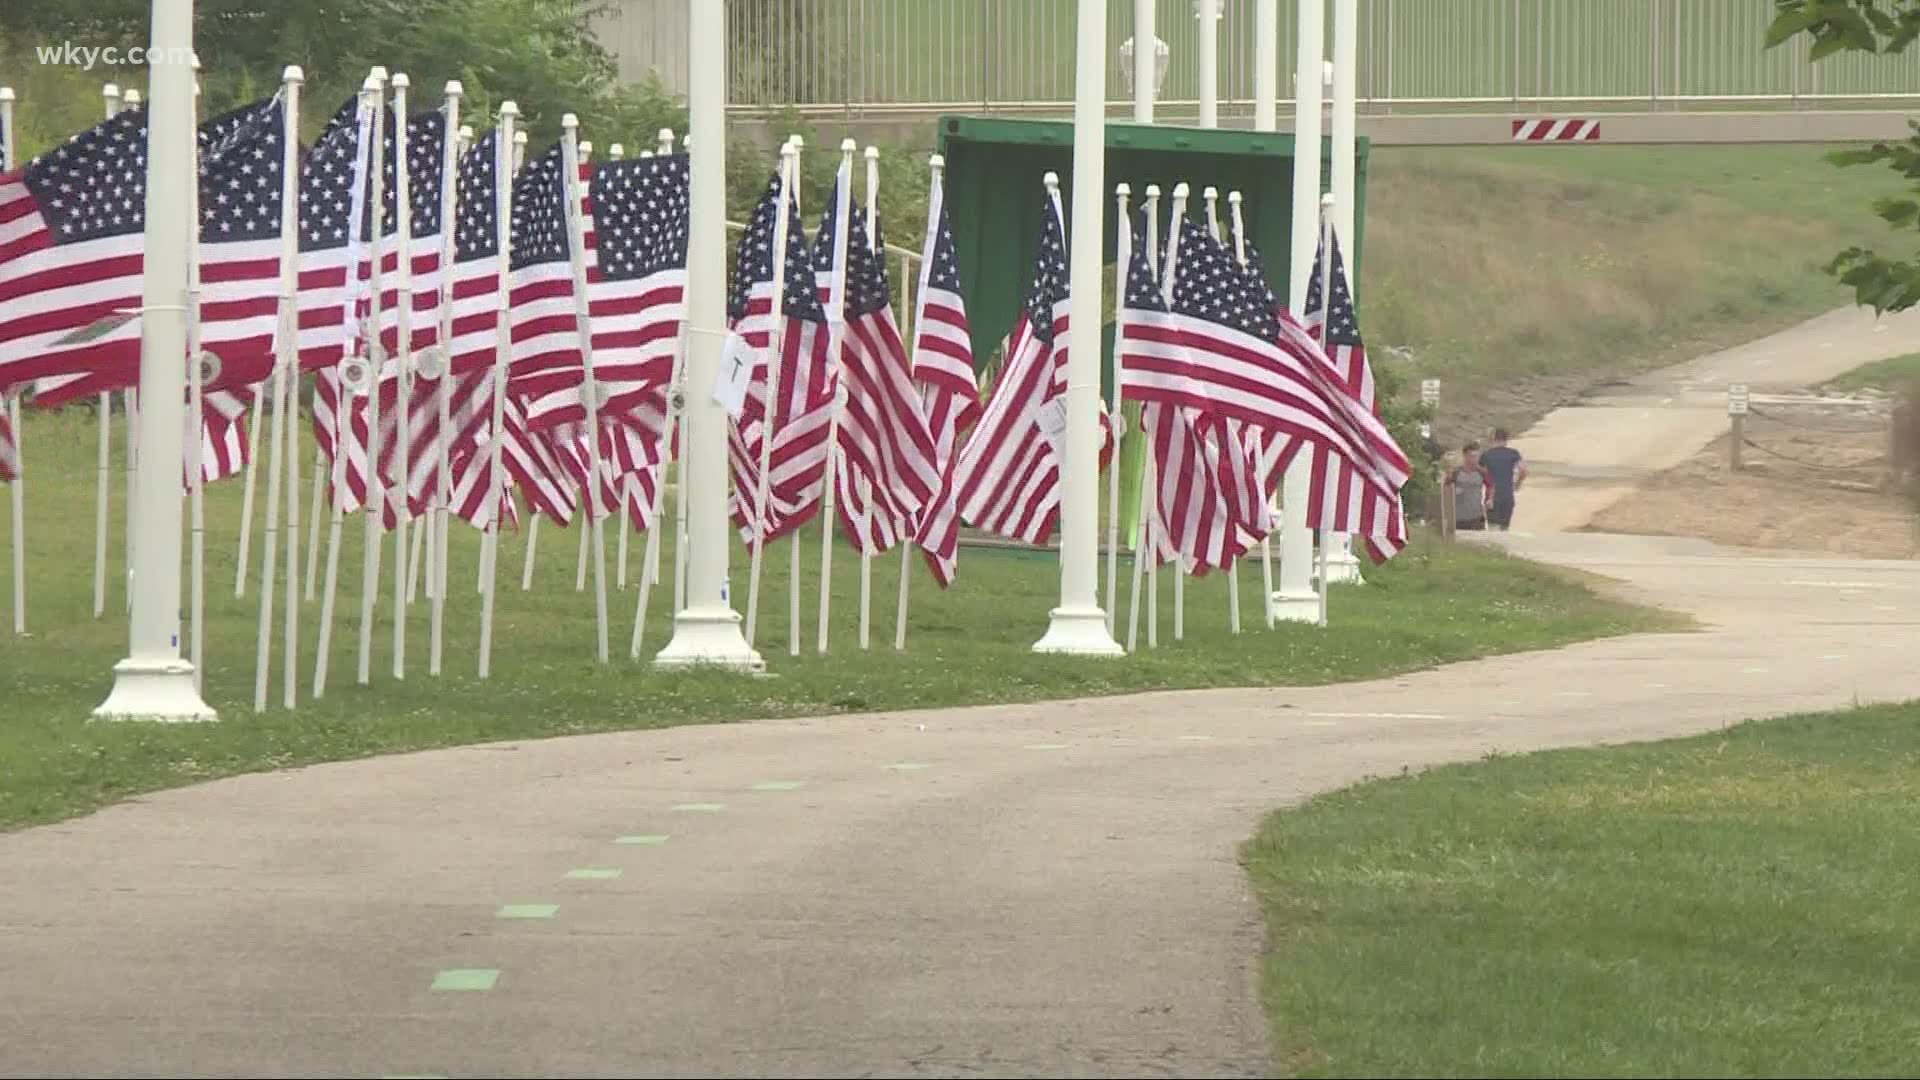 Friday is September 11th and there's an amazing sight at Edgewater Park. Nearly four hundred American Flags went up along the walking path today.